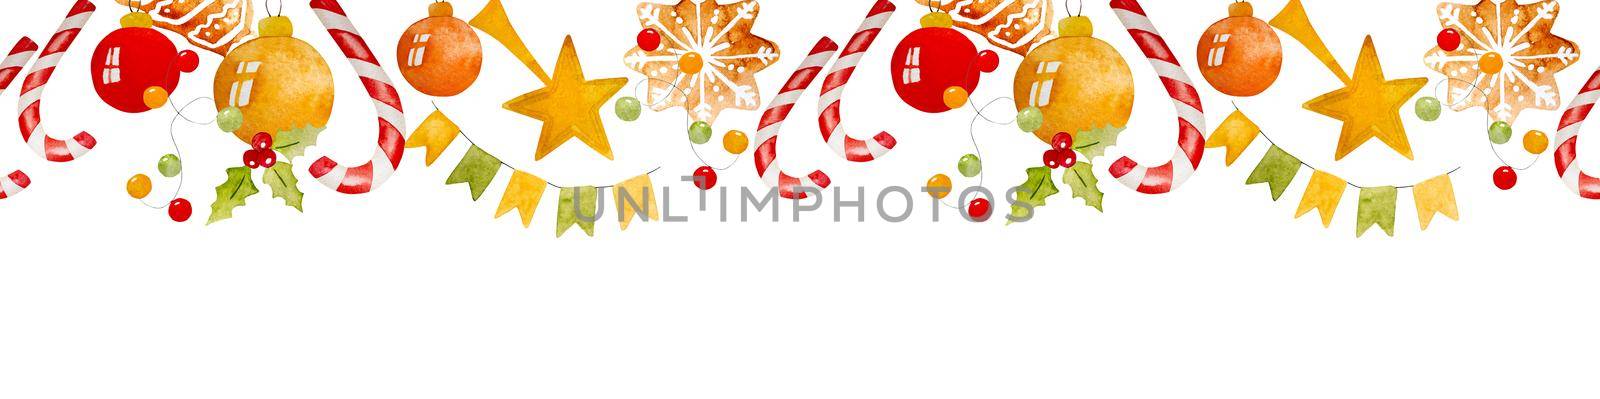 Christmas drawings watercolor seamless pattern with mug, xmas lollipop and mittens. New Year festive paintings for decoration